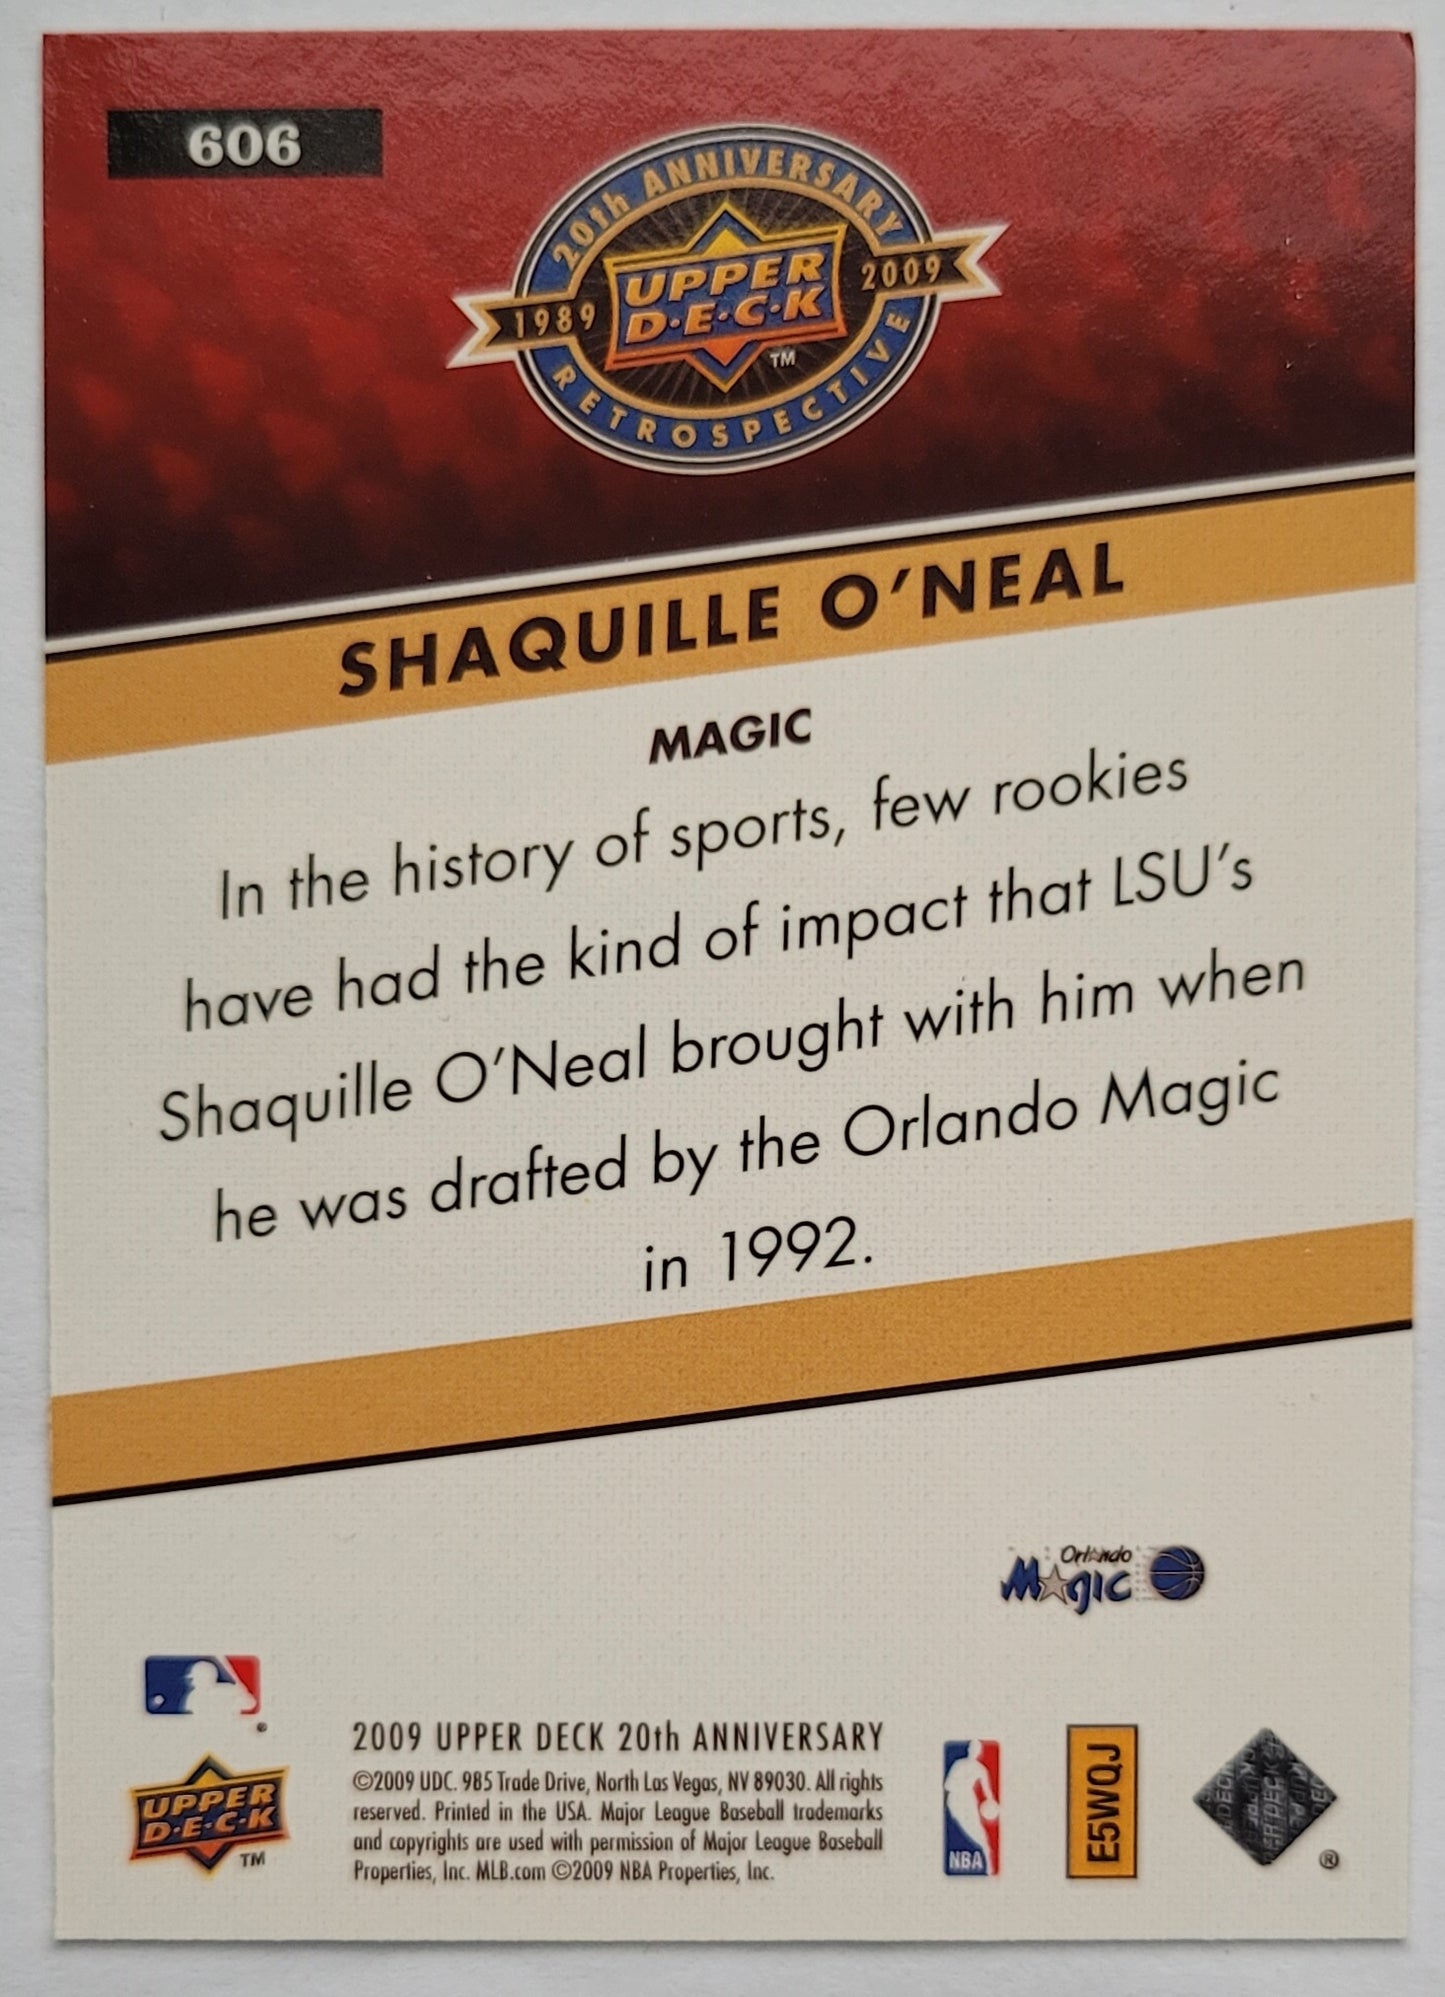 Shaquille O`Neal - 2009 Upper Deck 20th Anniversary #606